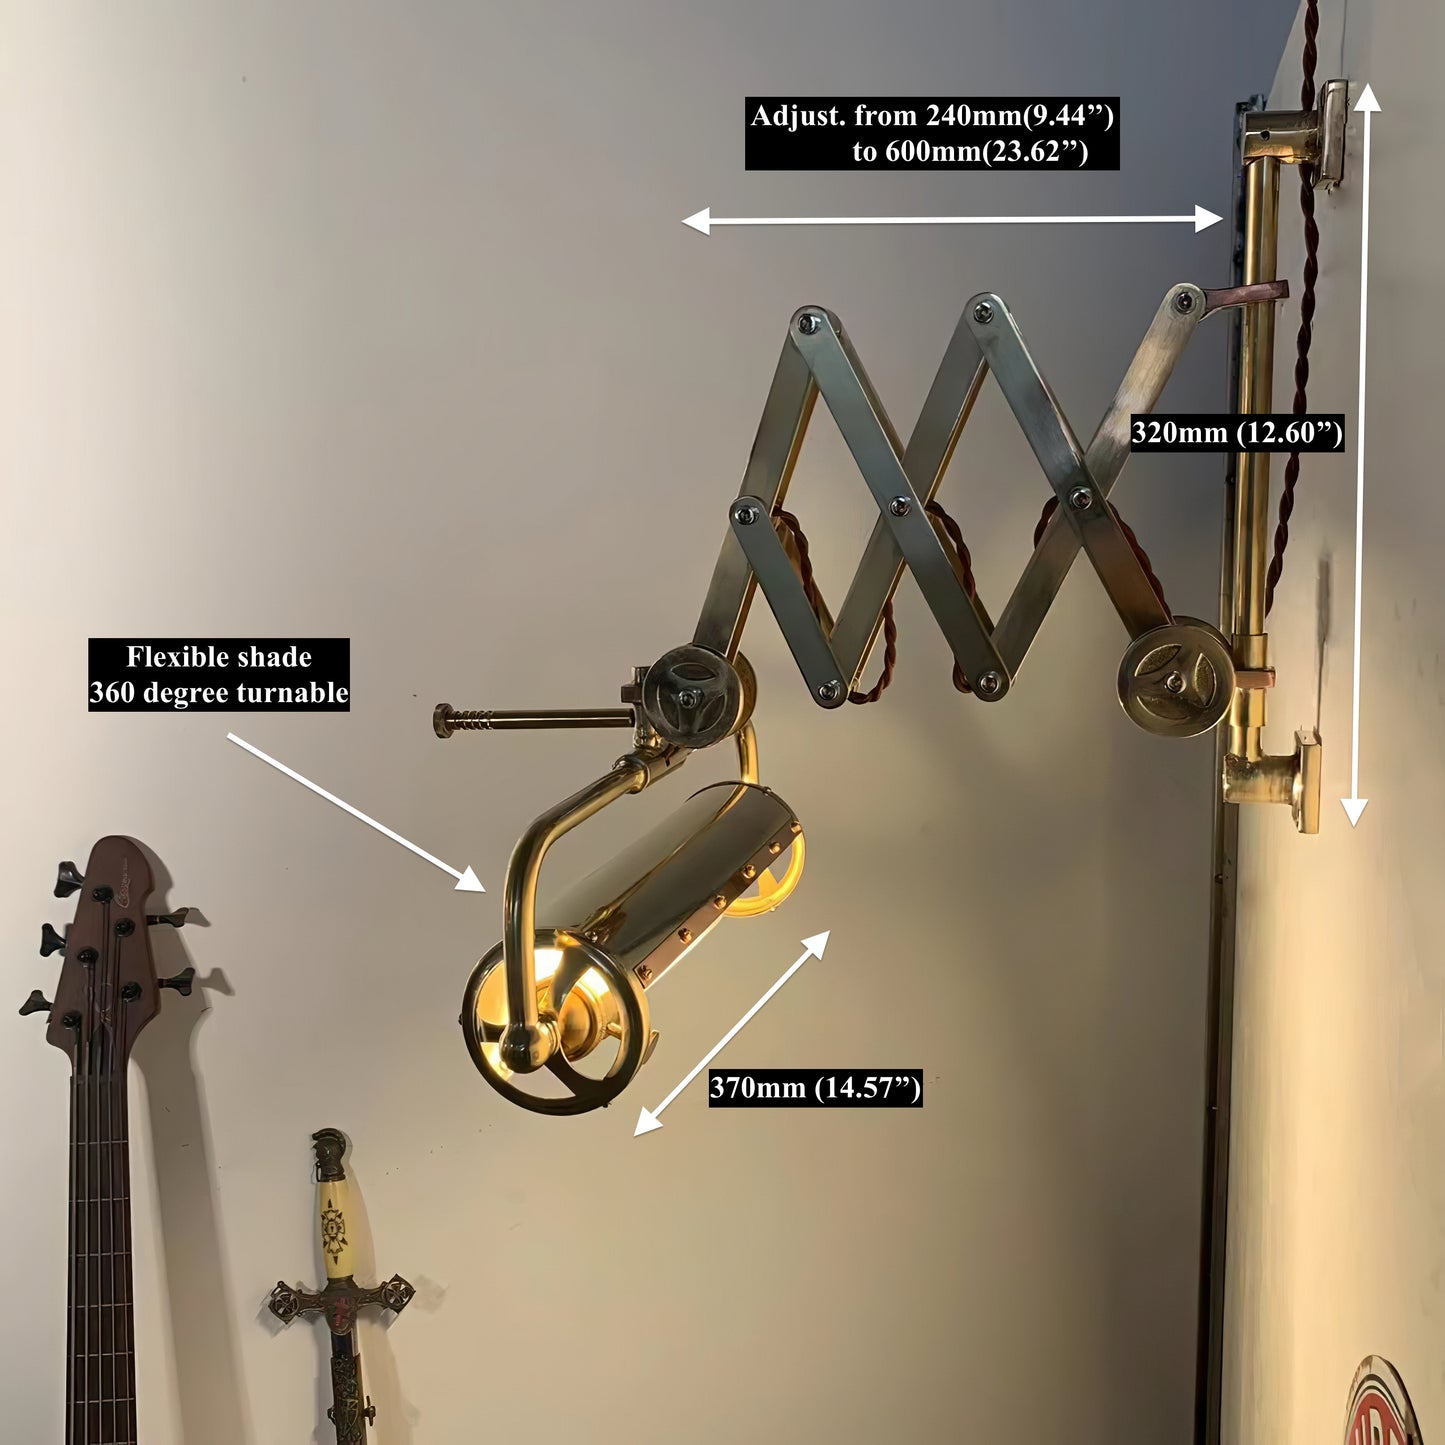 Flexi - Turnable lampshade and Adjustable Arm Vintage Industrial Brass Wall Sconce